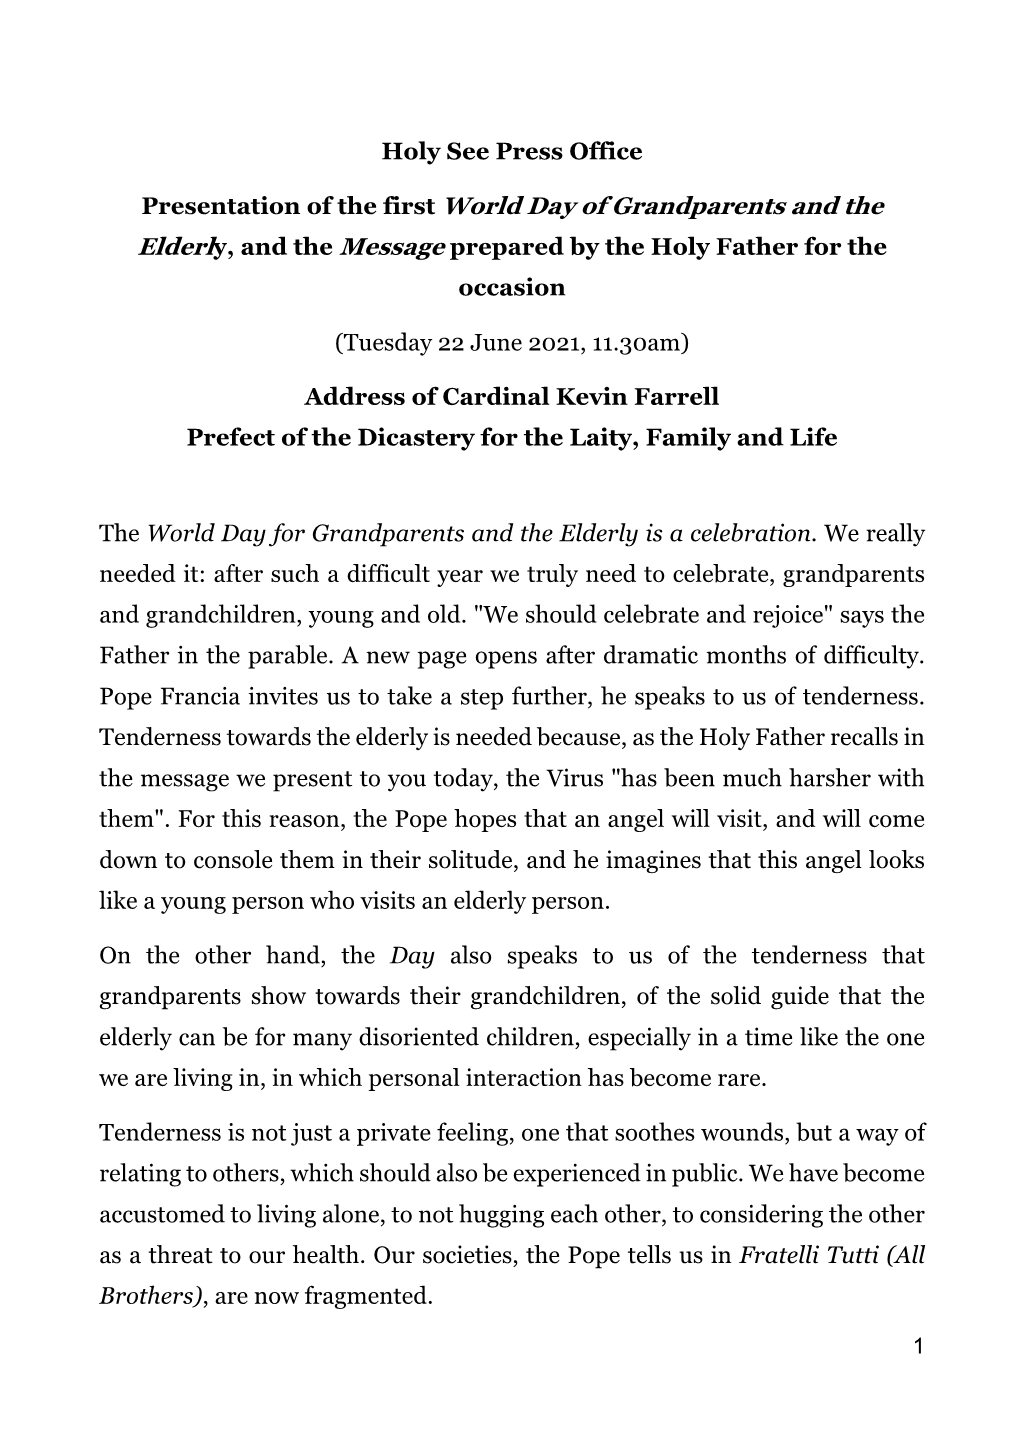 Presentation of the First World Day of Grandparents and the Elderly, and the Message Prepared by the Holy Father for the Occasion